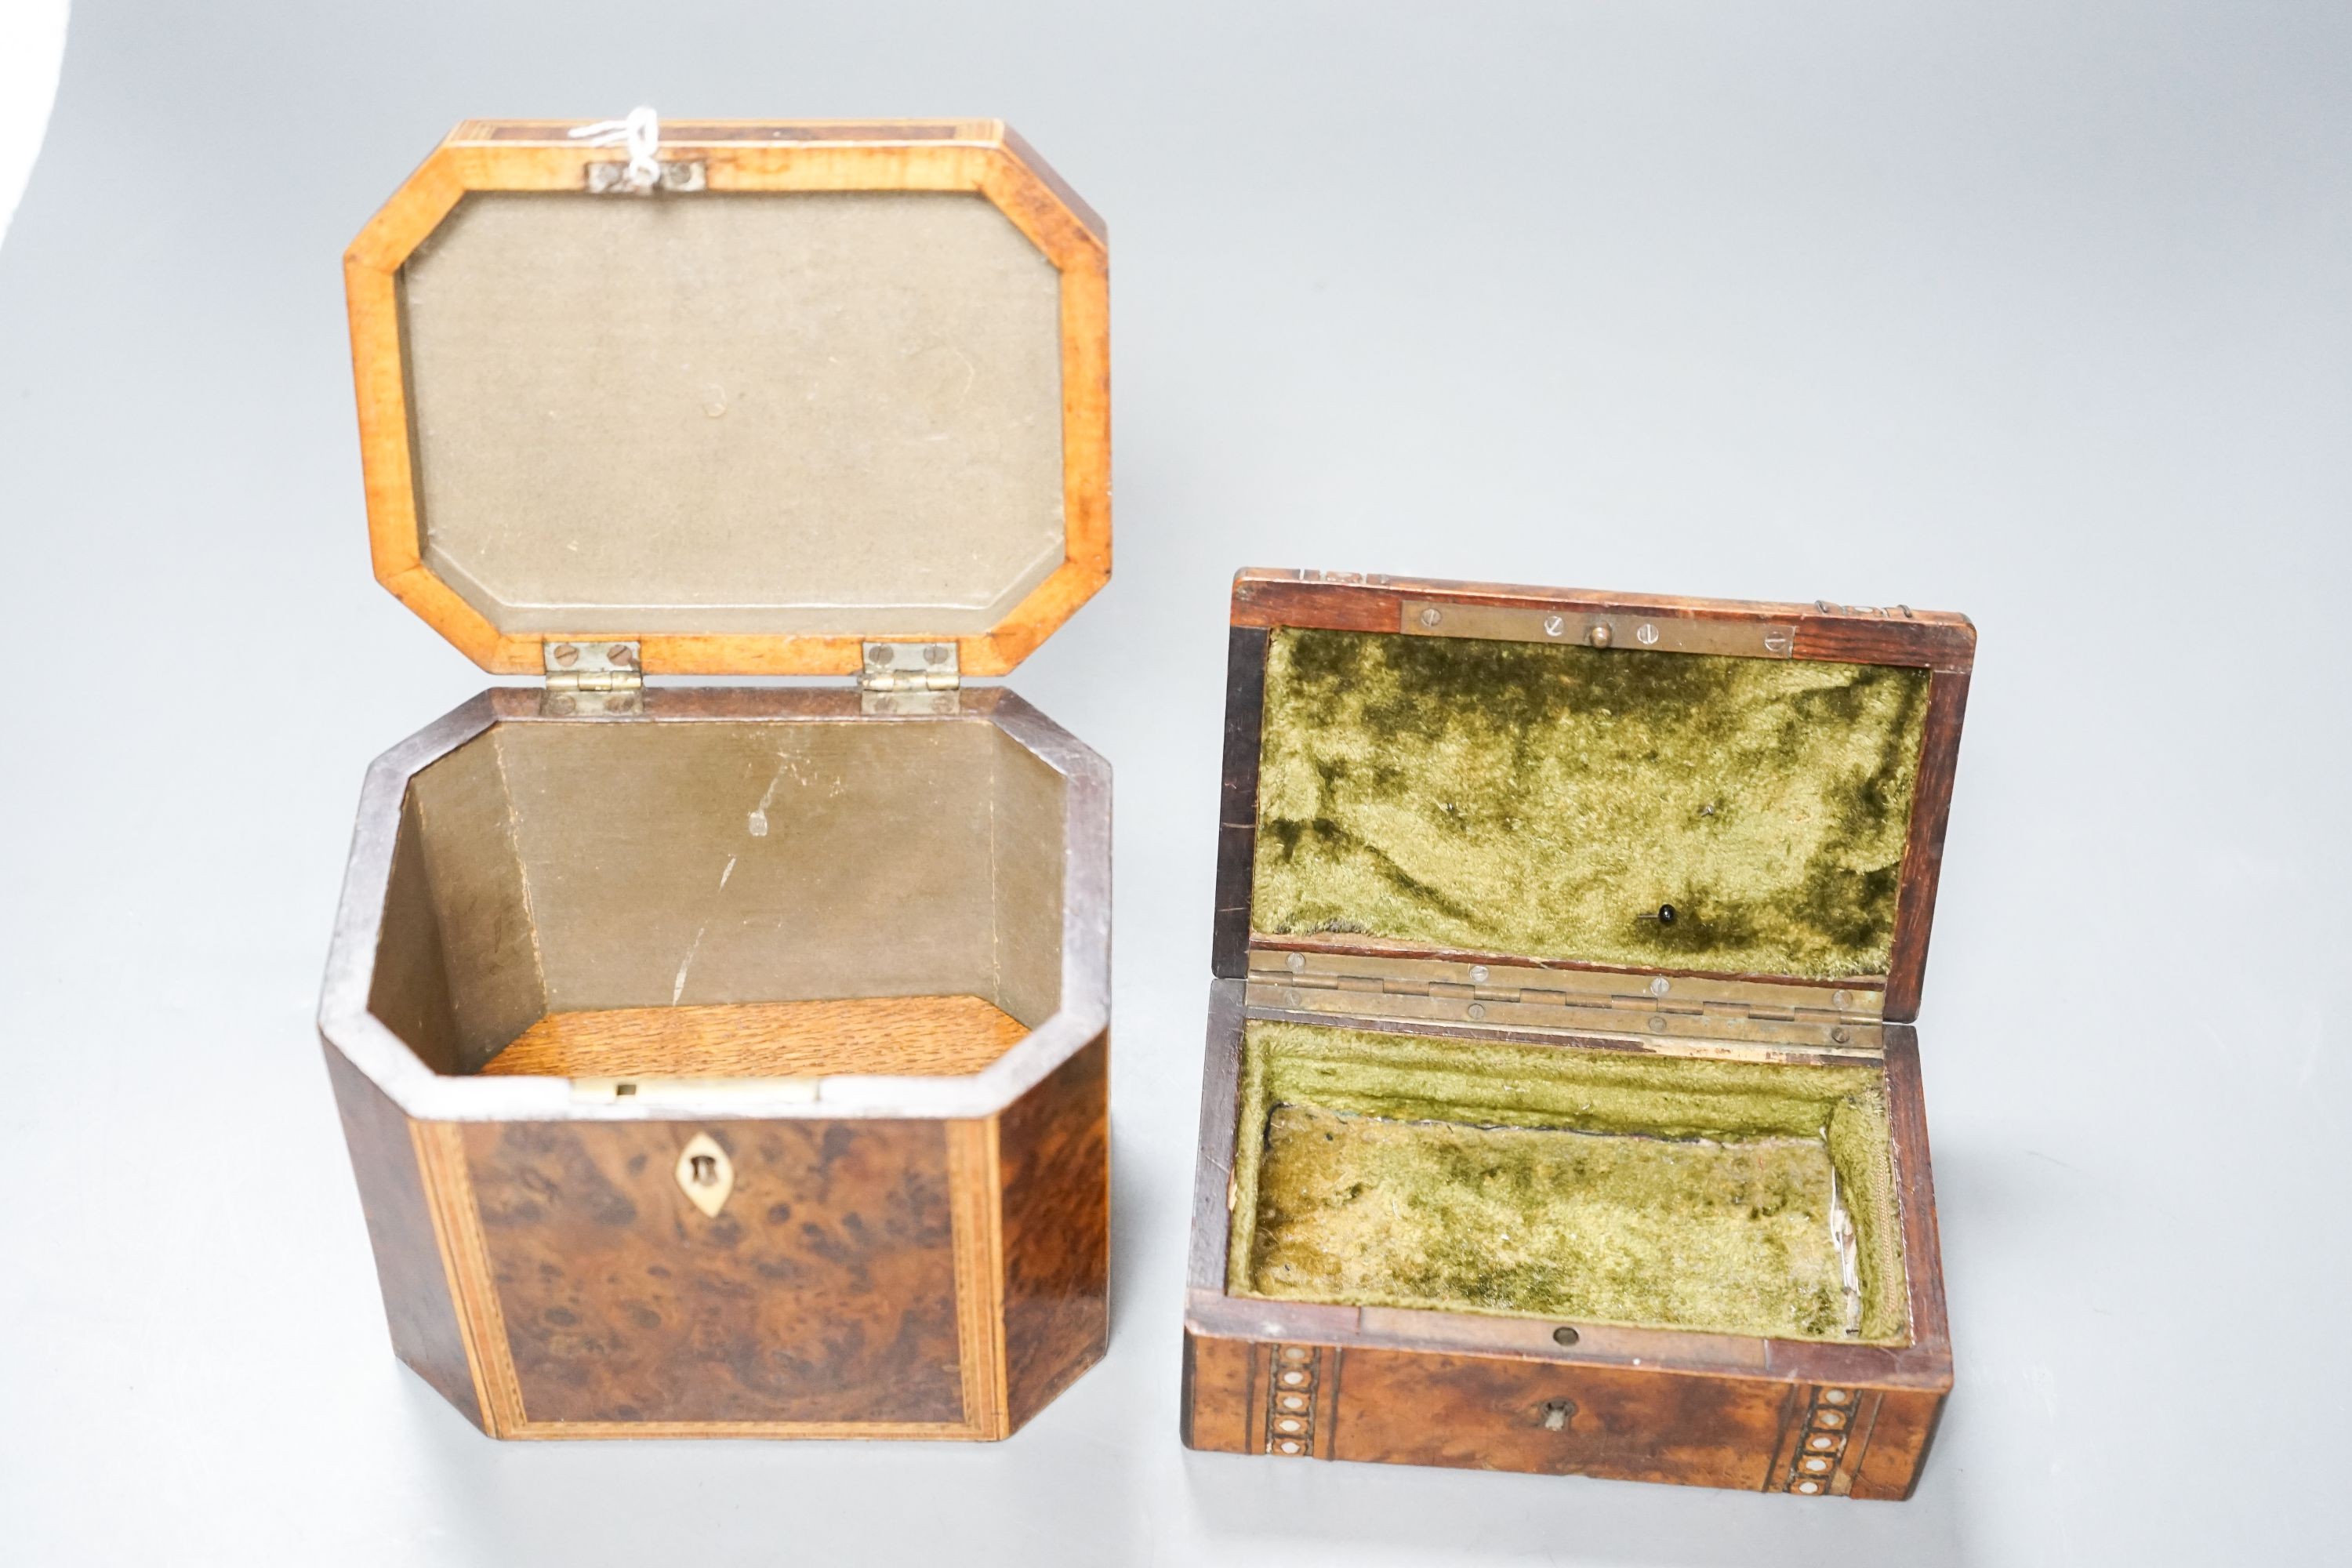 A George III burr yew and harewood, tulipwood and boxwood strung tea caddy, of octagonal form, 12.5cm and a small French yew jewellery casket